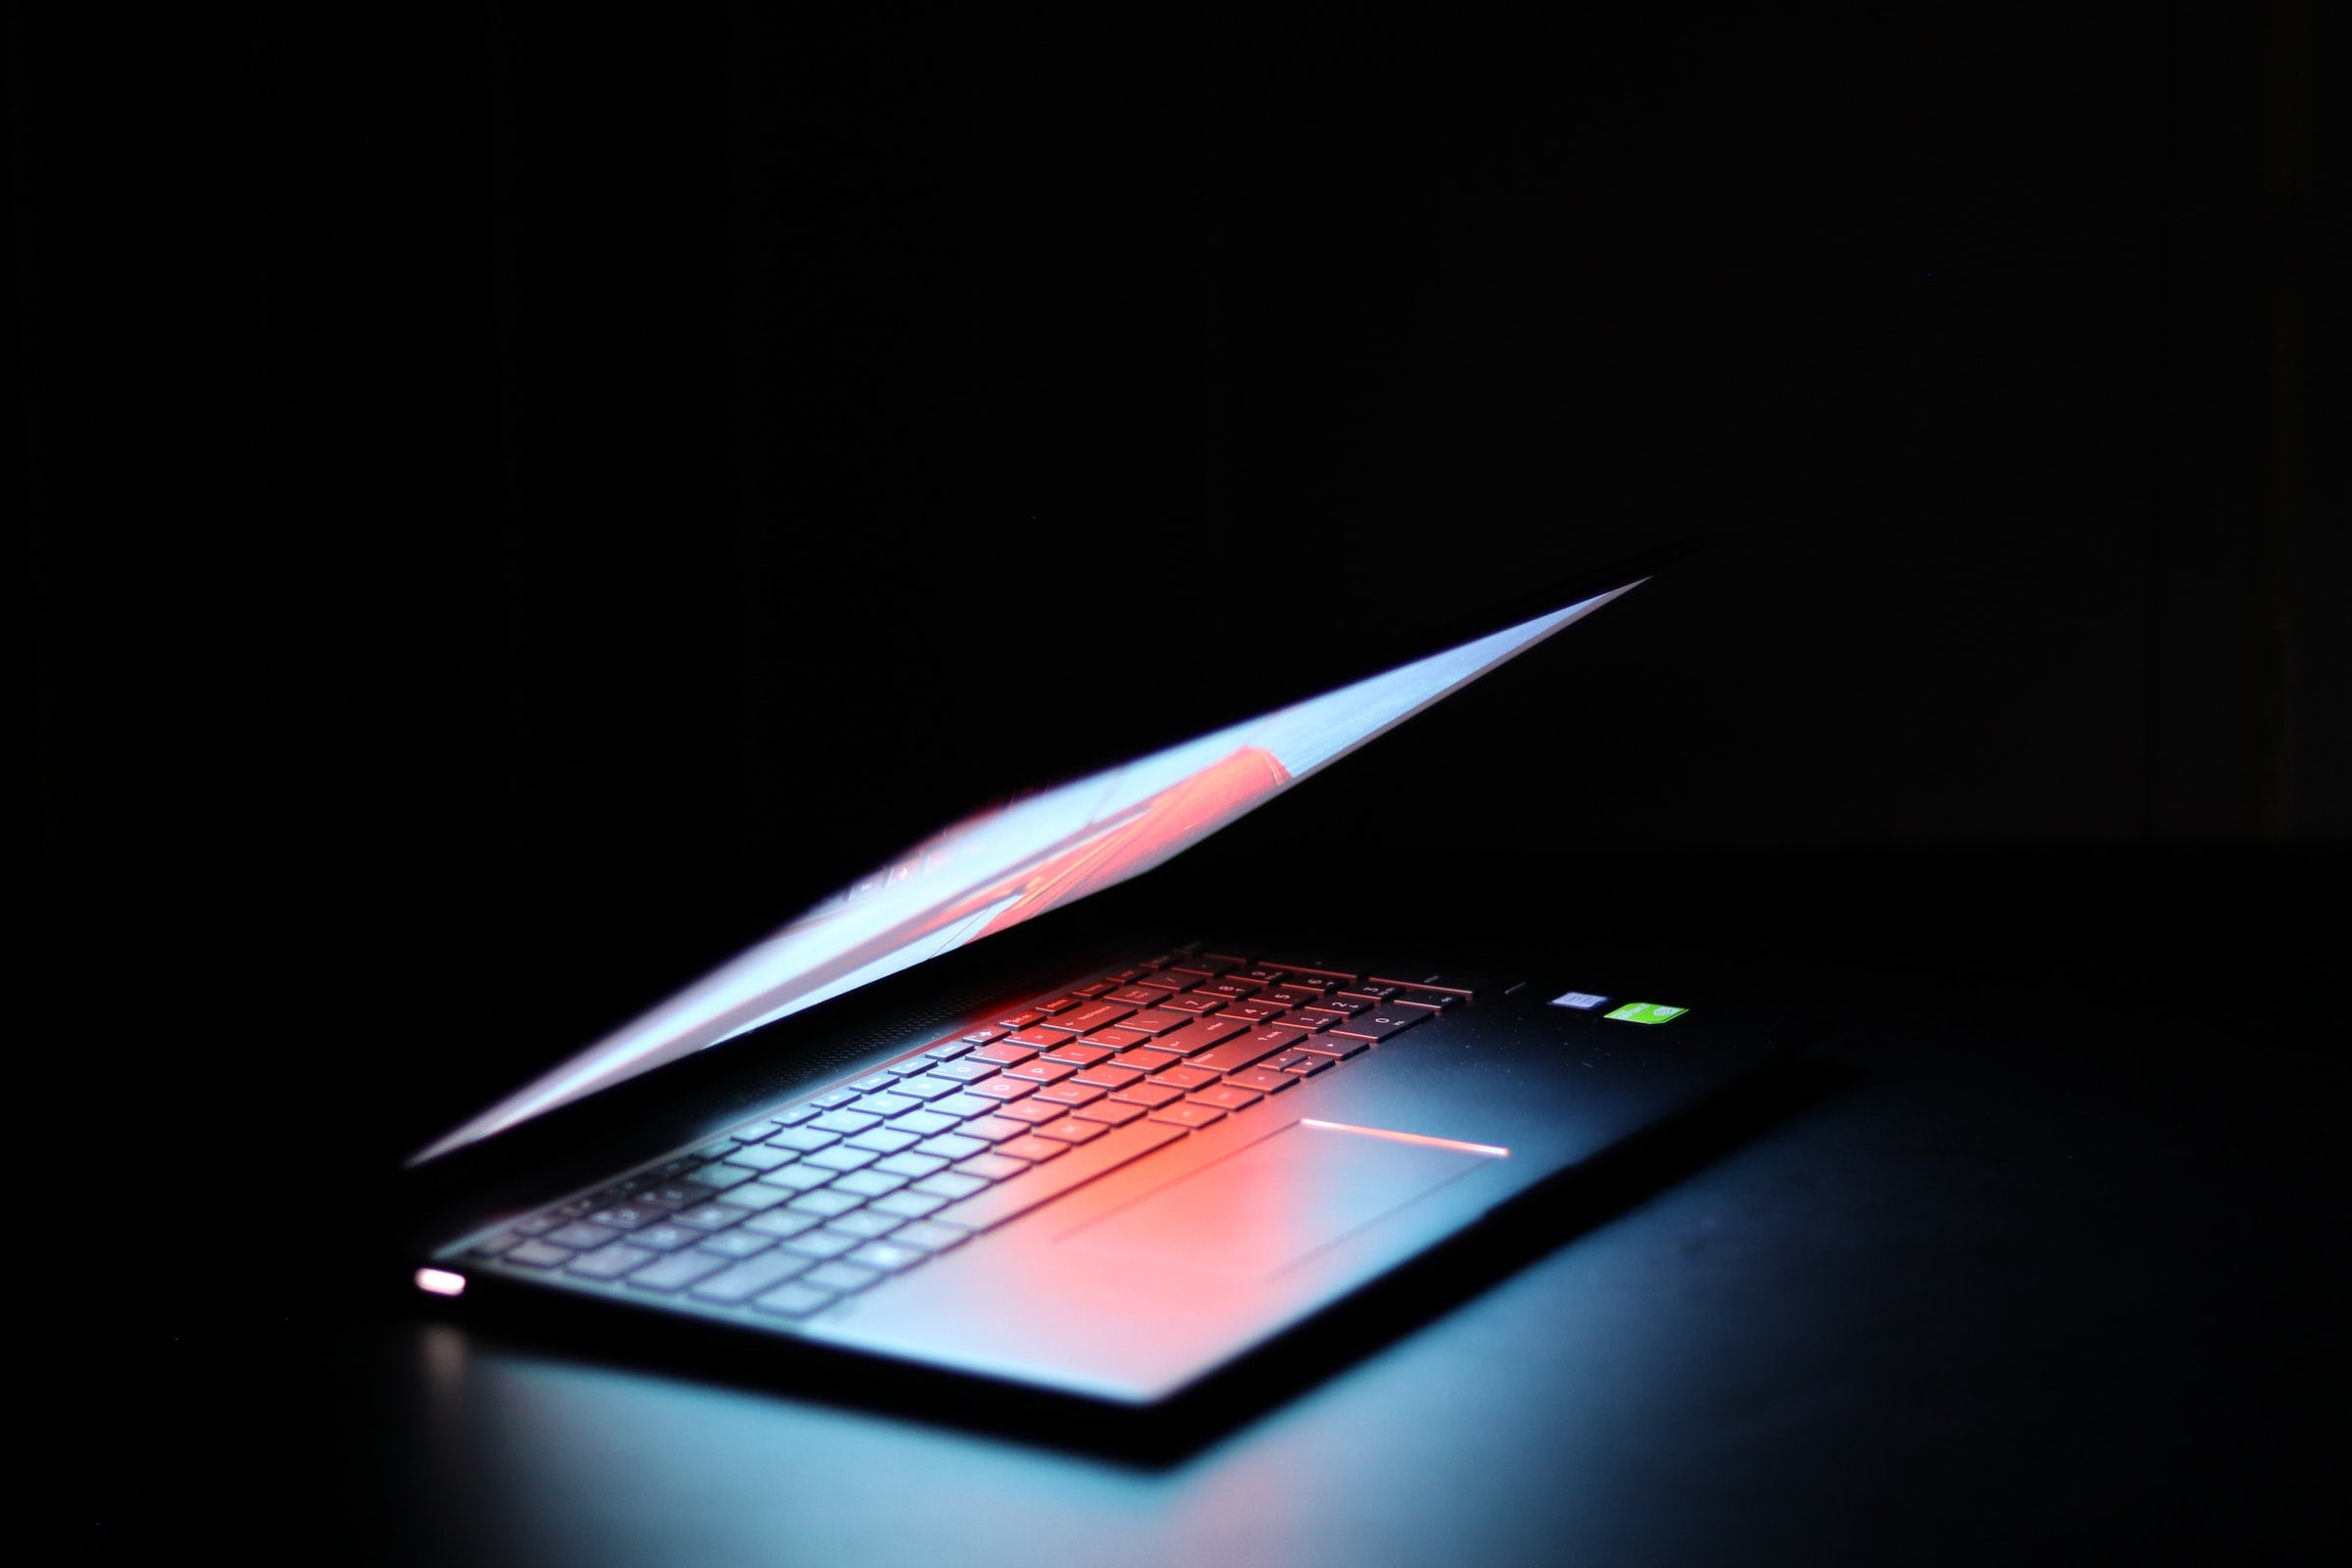 A half-opened laptop in a dark space with only a light shining on the laptop